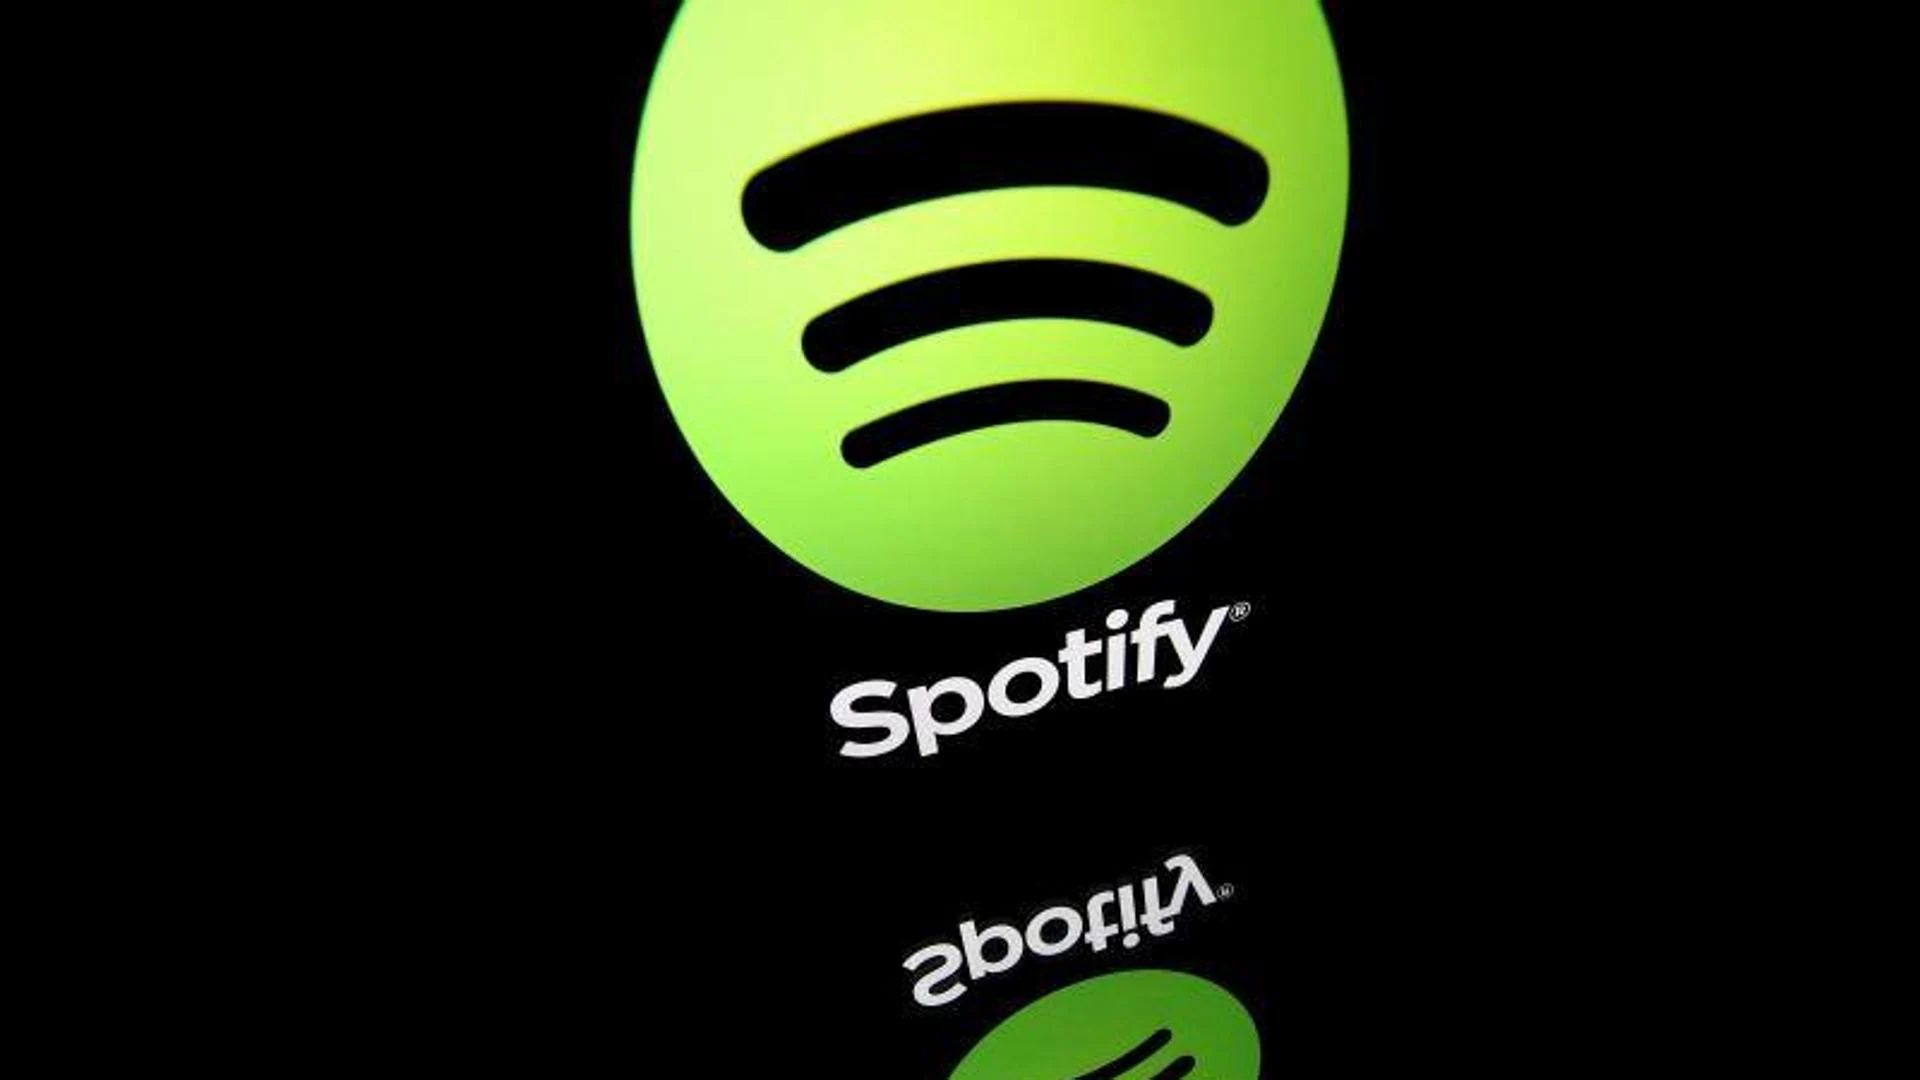 Spotify, Booking or Glovo revolt against the 'Google tax'